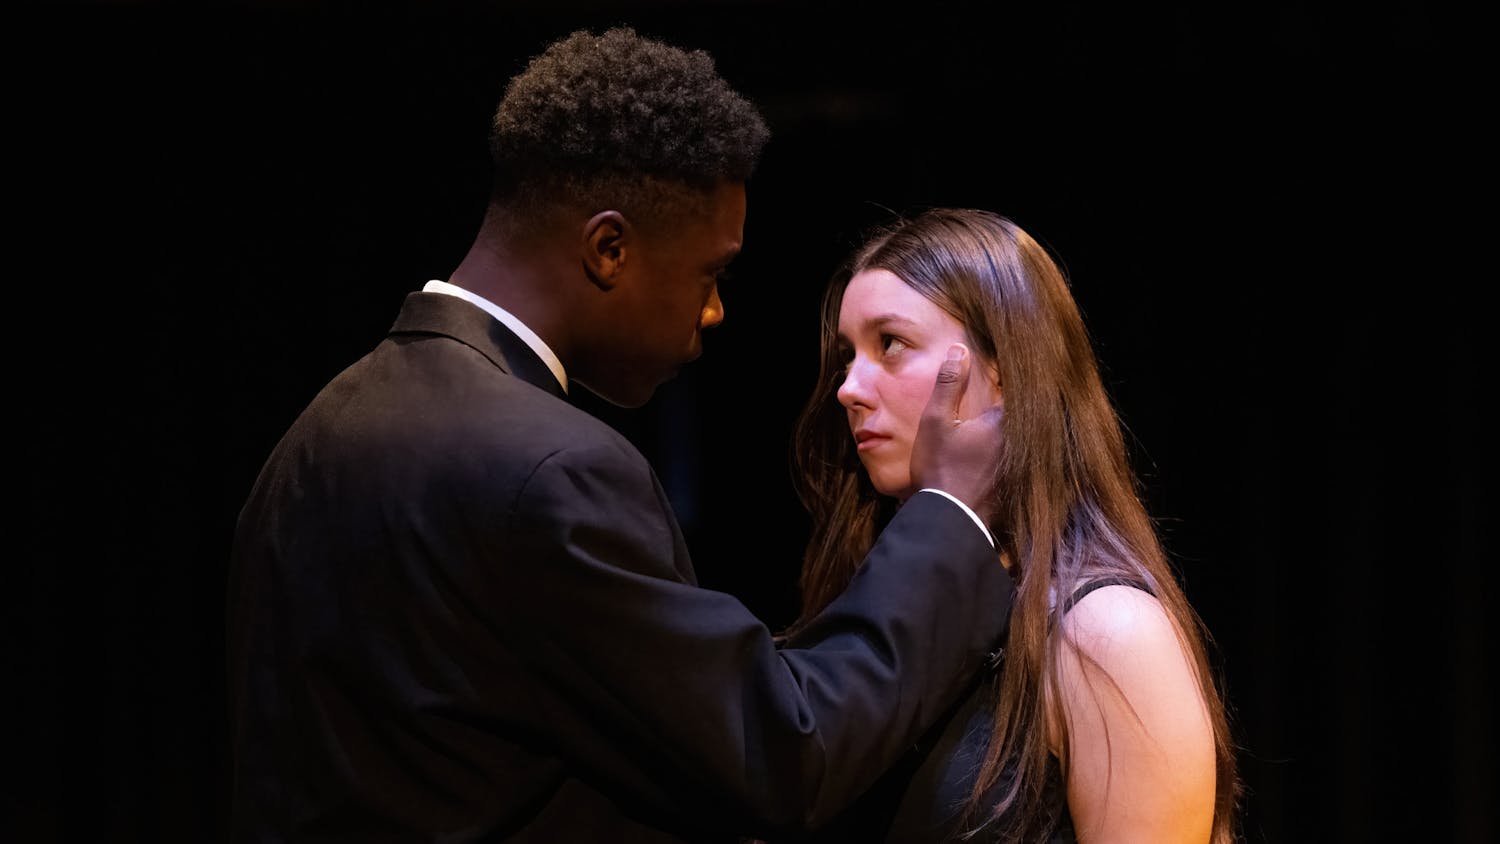 Brandan Booker and Alissa di Cristo played the only two roles in the student-directed play "Gruesome Playground Injuries."